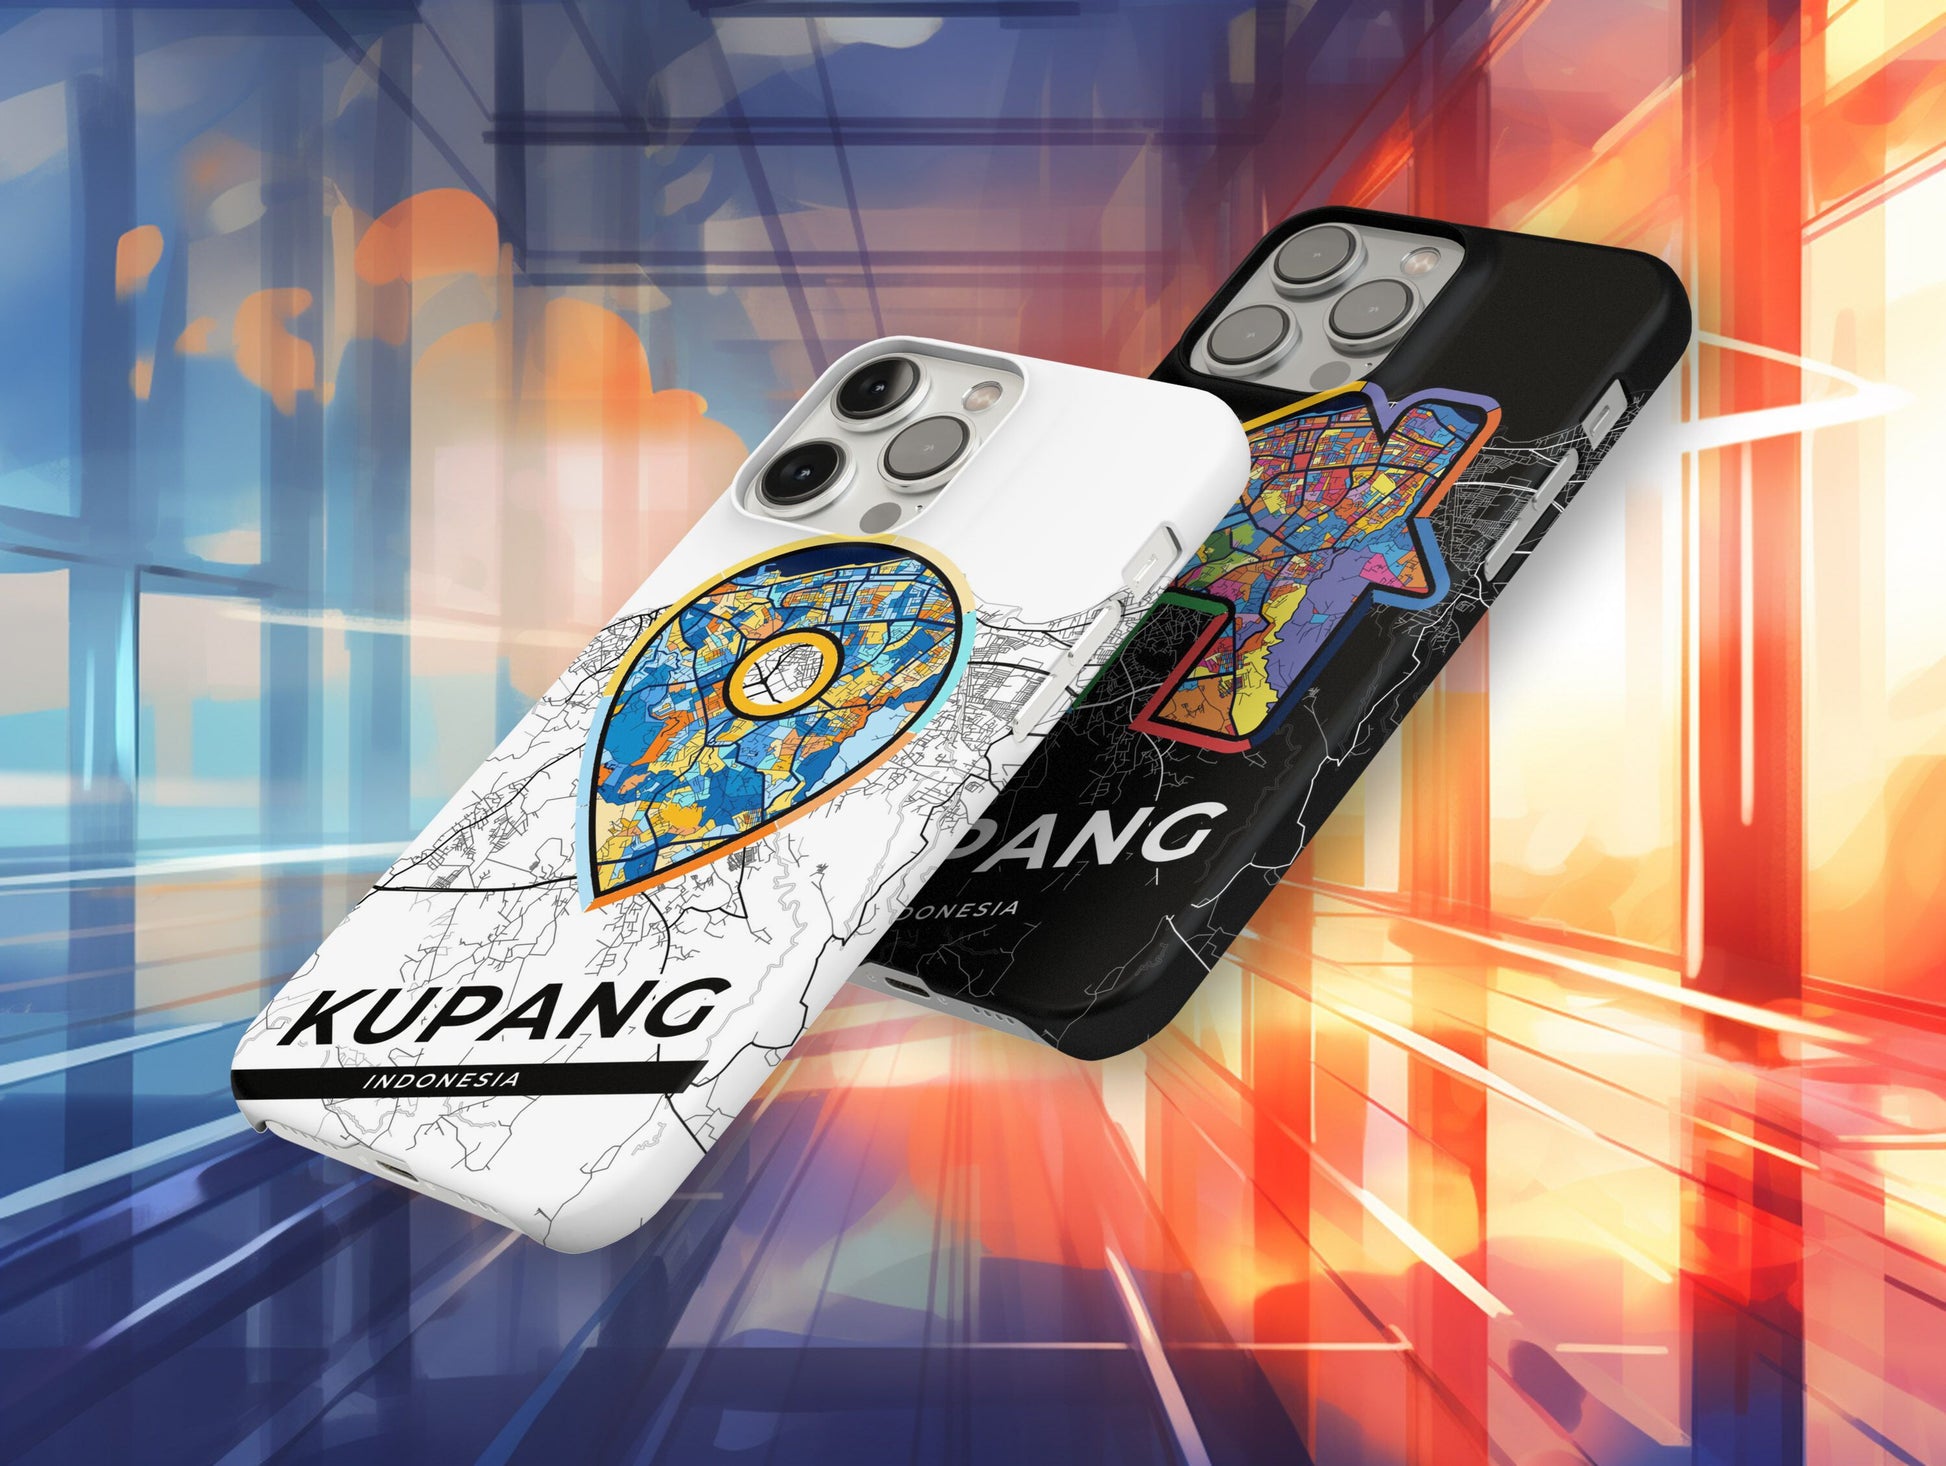 Kupang Indonesia slim phone case with colorful icon. Birthday, wedding or housewarming gift. Couple match cases.